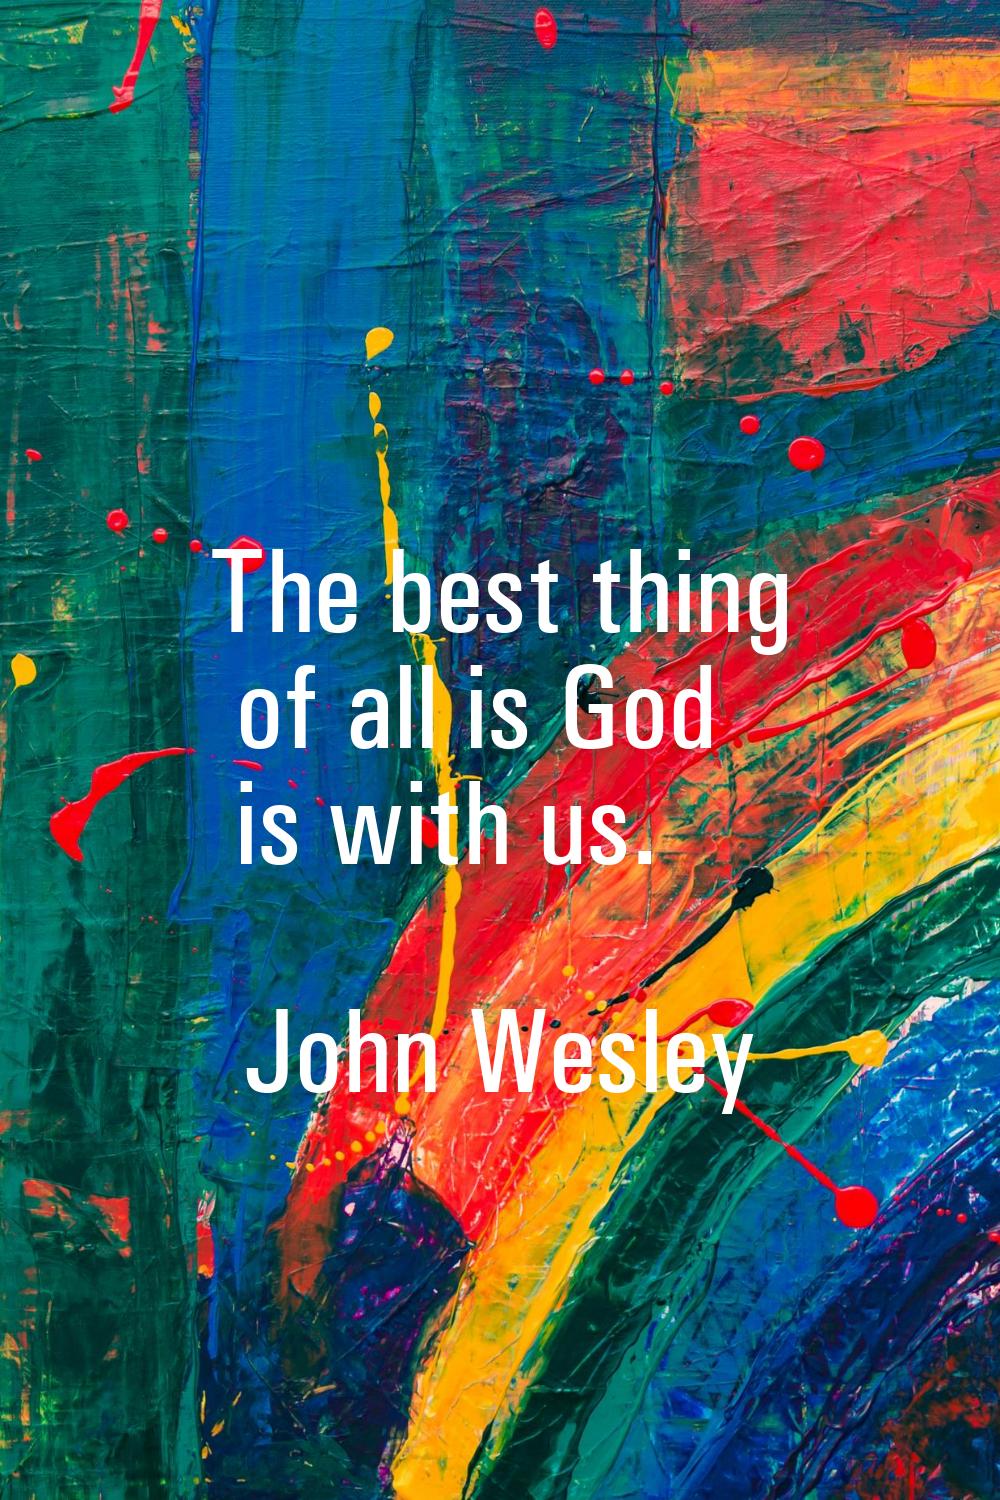 The best thing of all is God is with us.